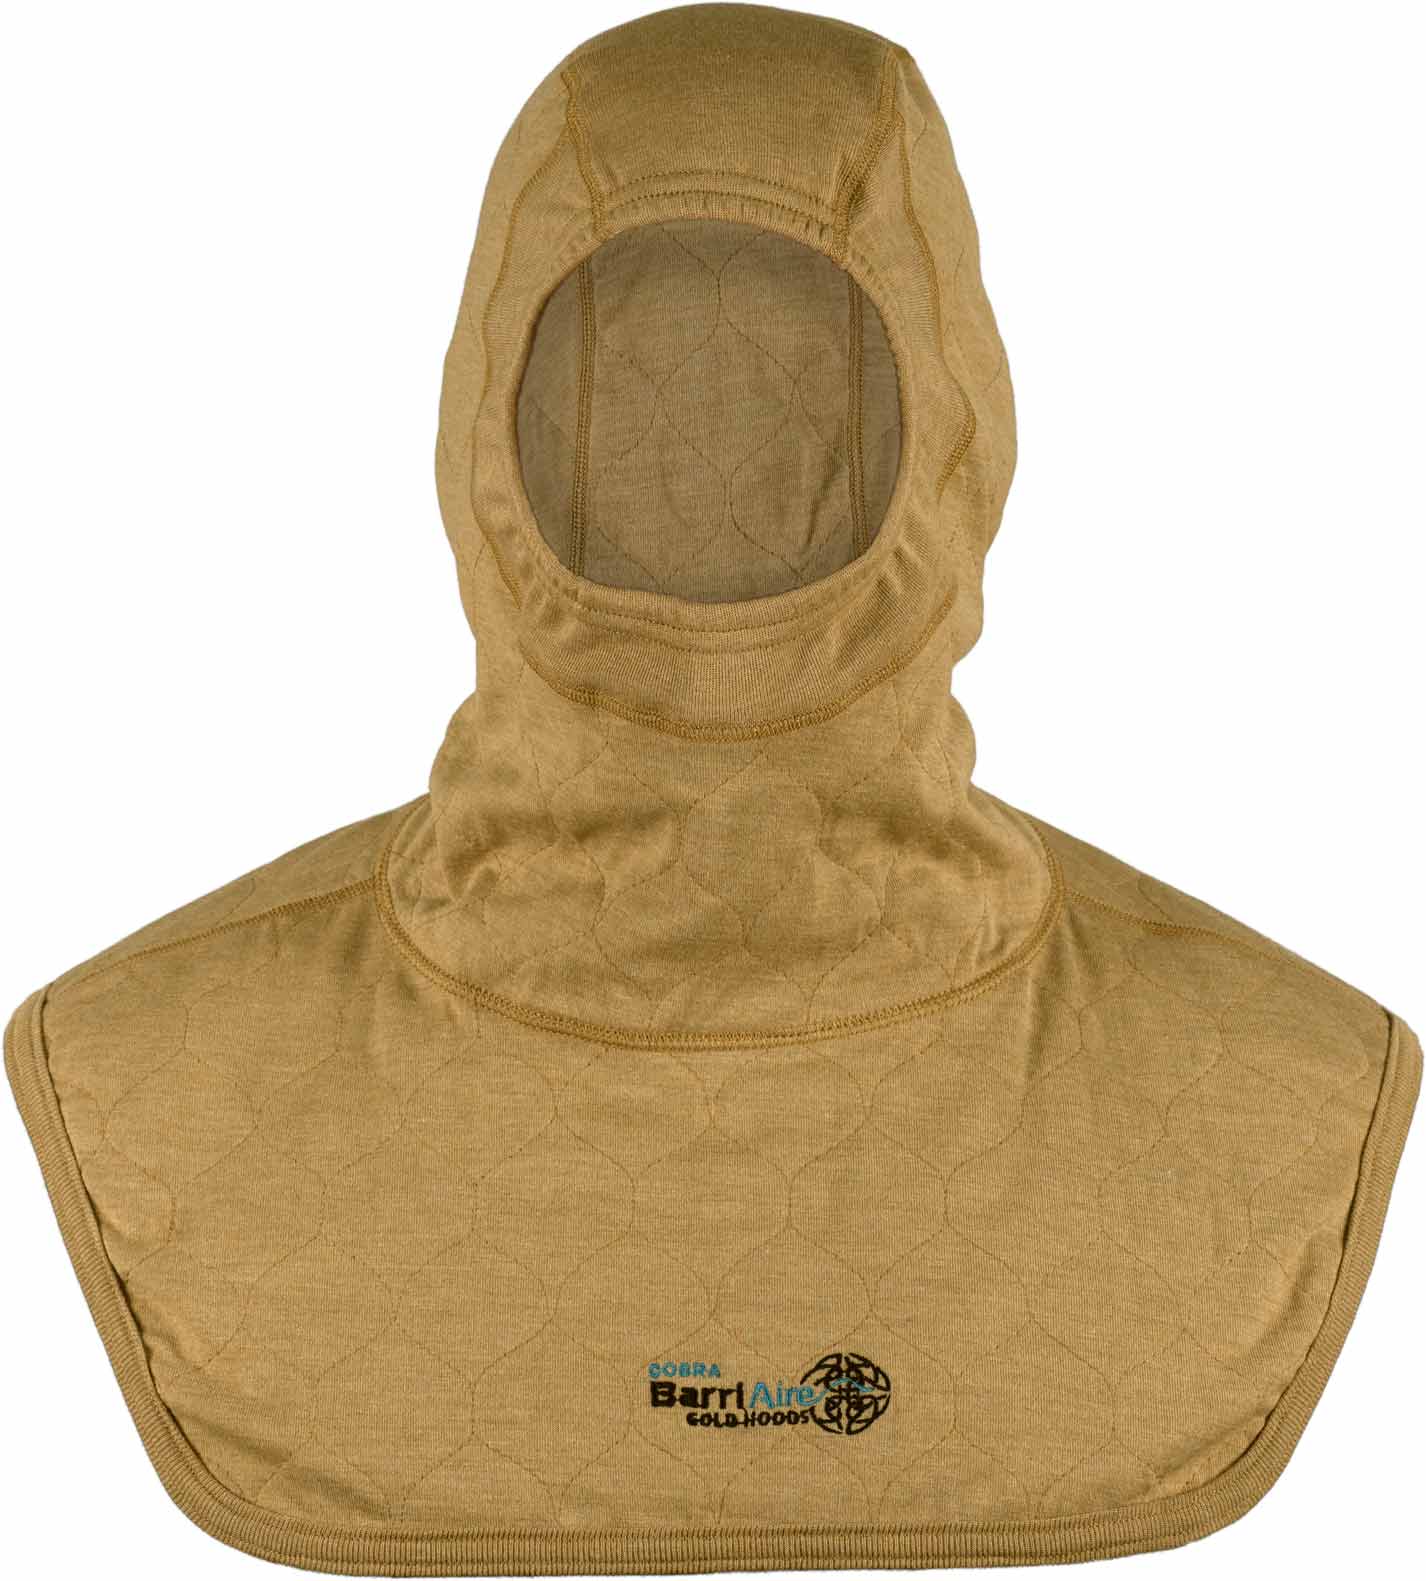 PGI BarriAire Gold Particulate Hood - Complete Coverage with Extended Bib and Nomex<sup>®</sup> Nano Flex Face Opening 39705-00-194071 - Front